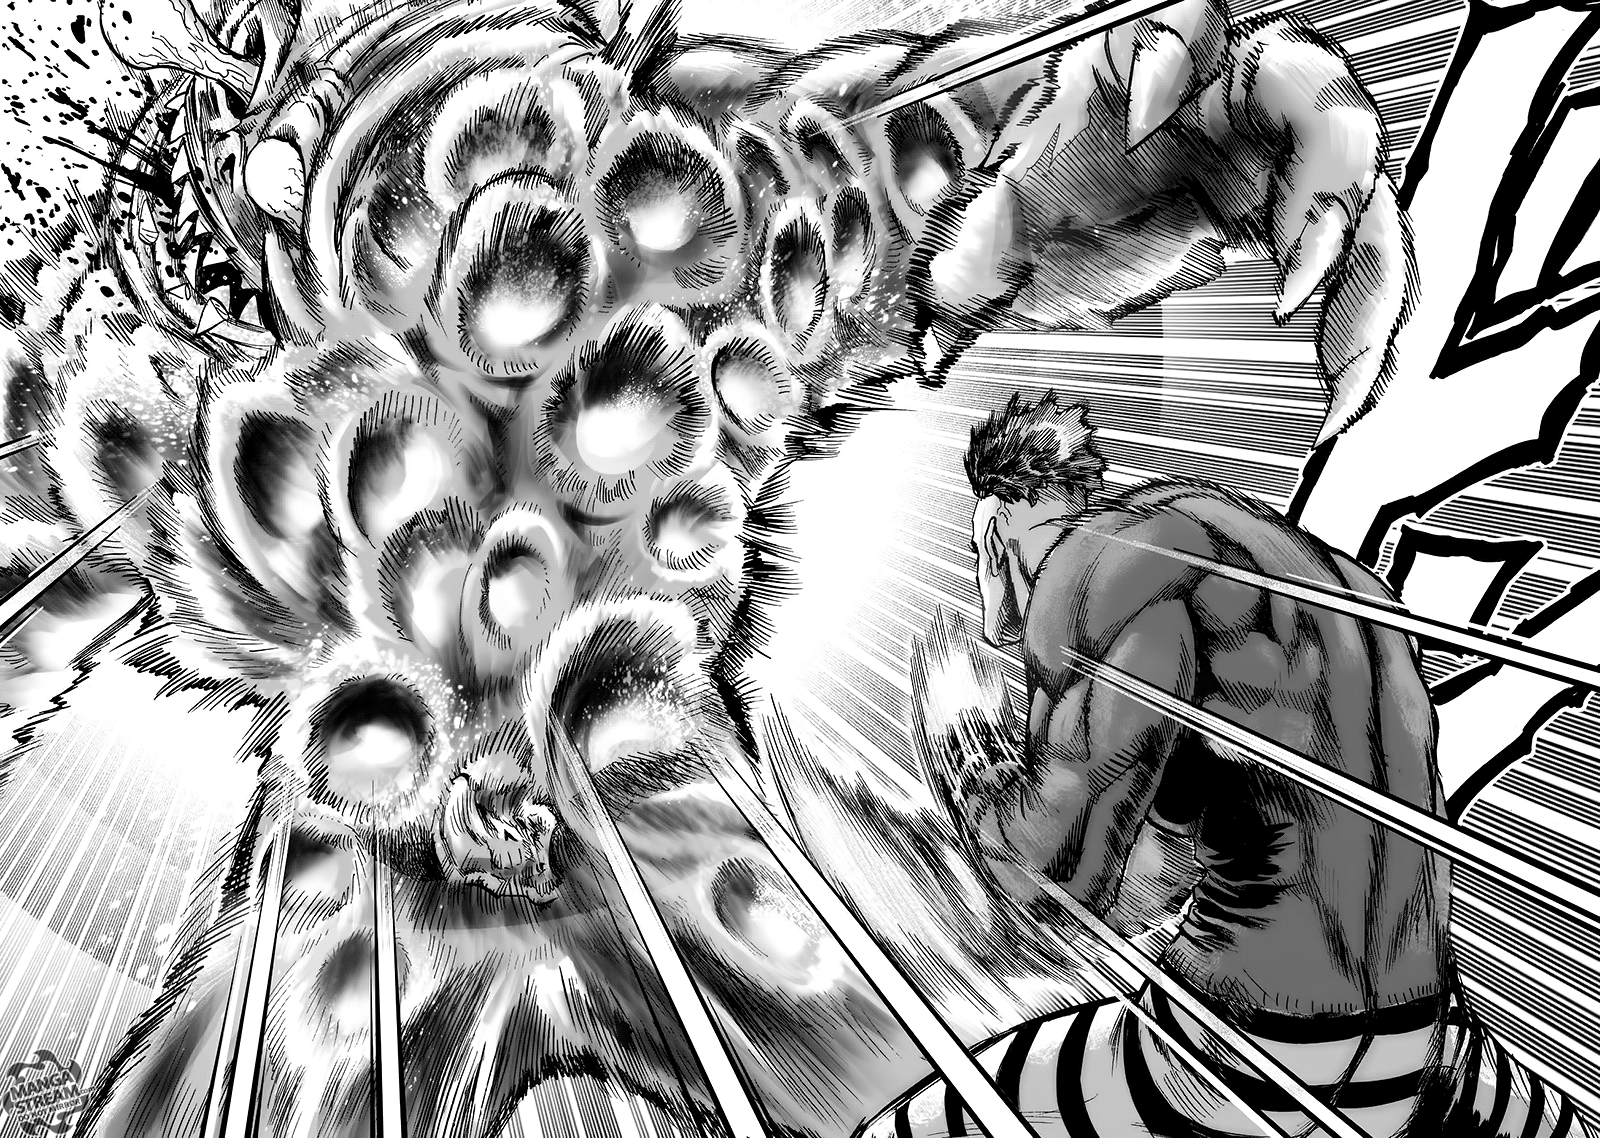 One Punch Man, Chapter 94 - I See image 135